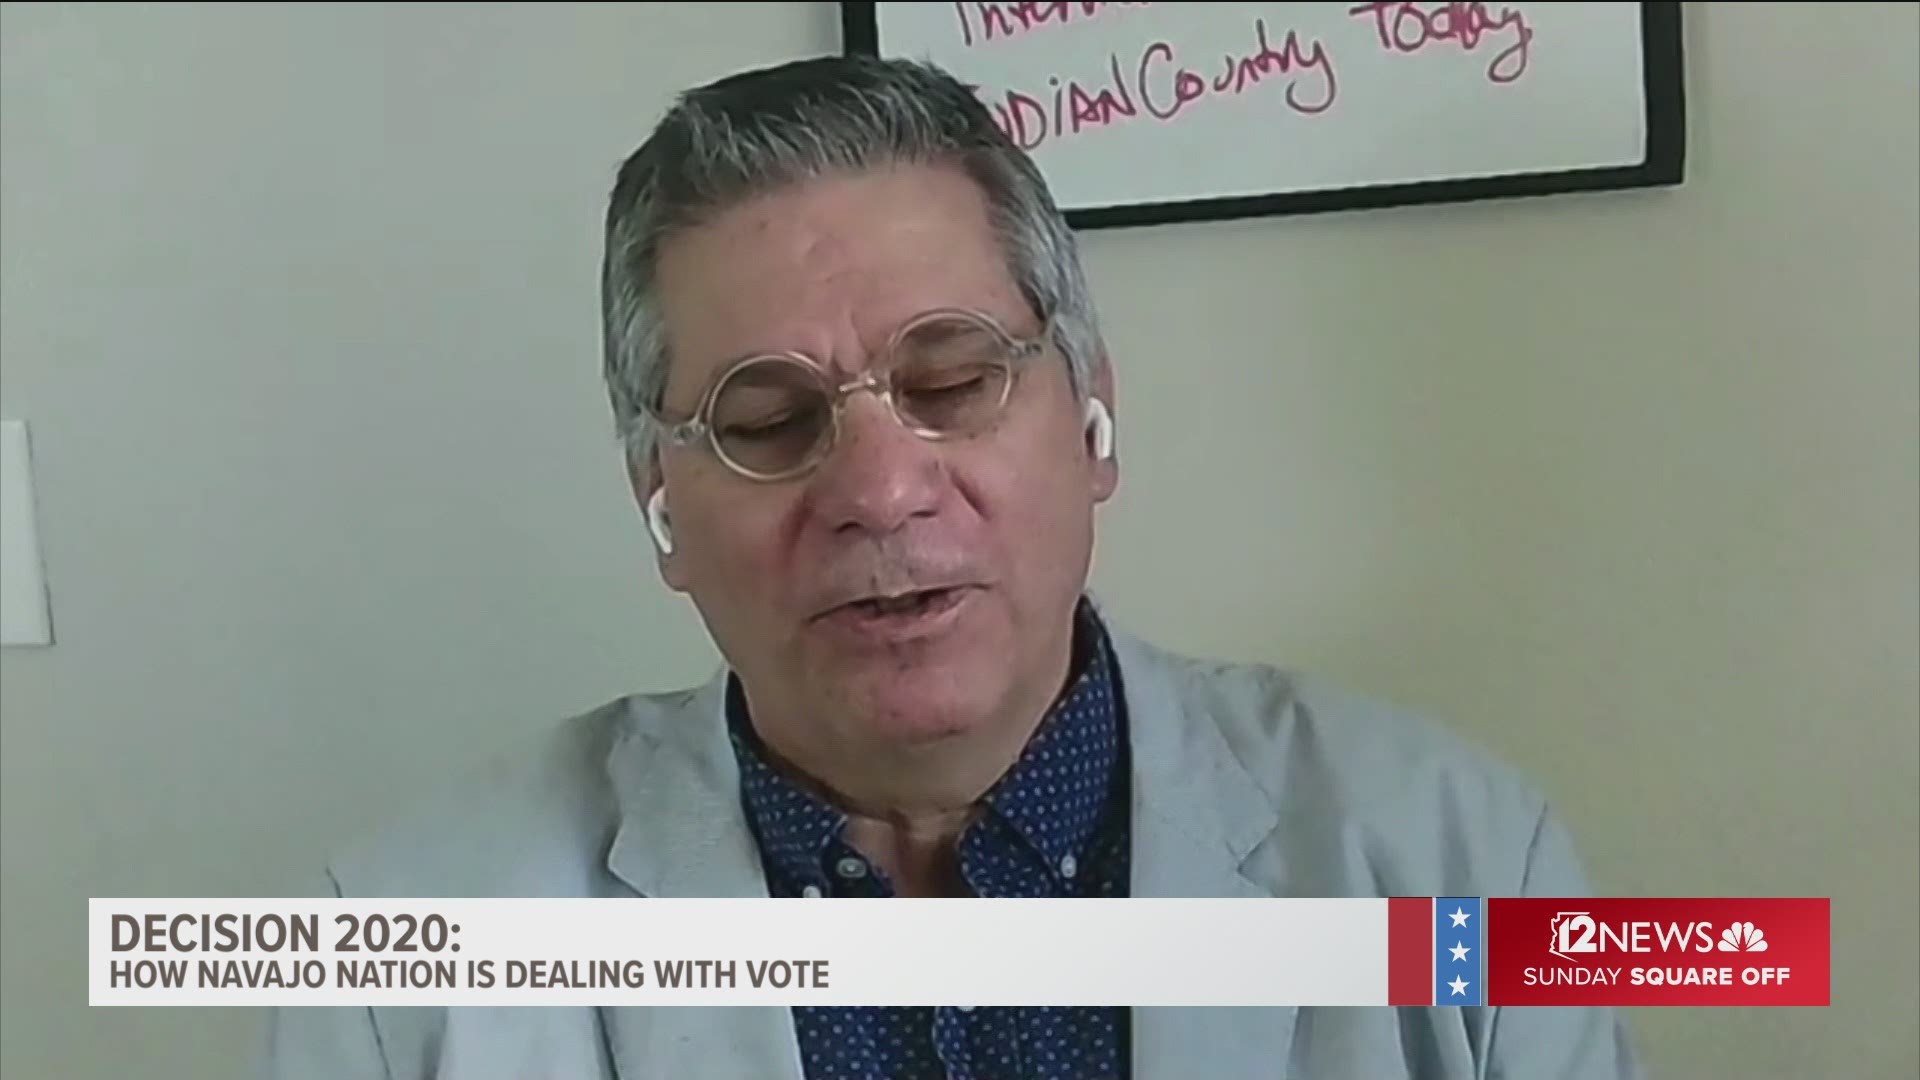 Concerns about the pandemic and mail delivery created voting challenges in the Navajo Nation. Mark Trahant, editor of Indian Country Today, explains the issue.